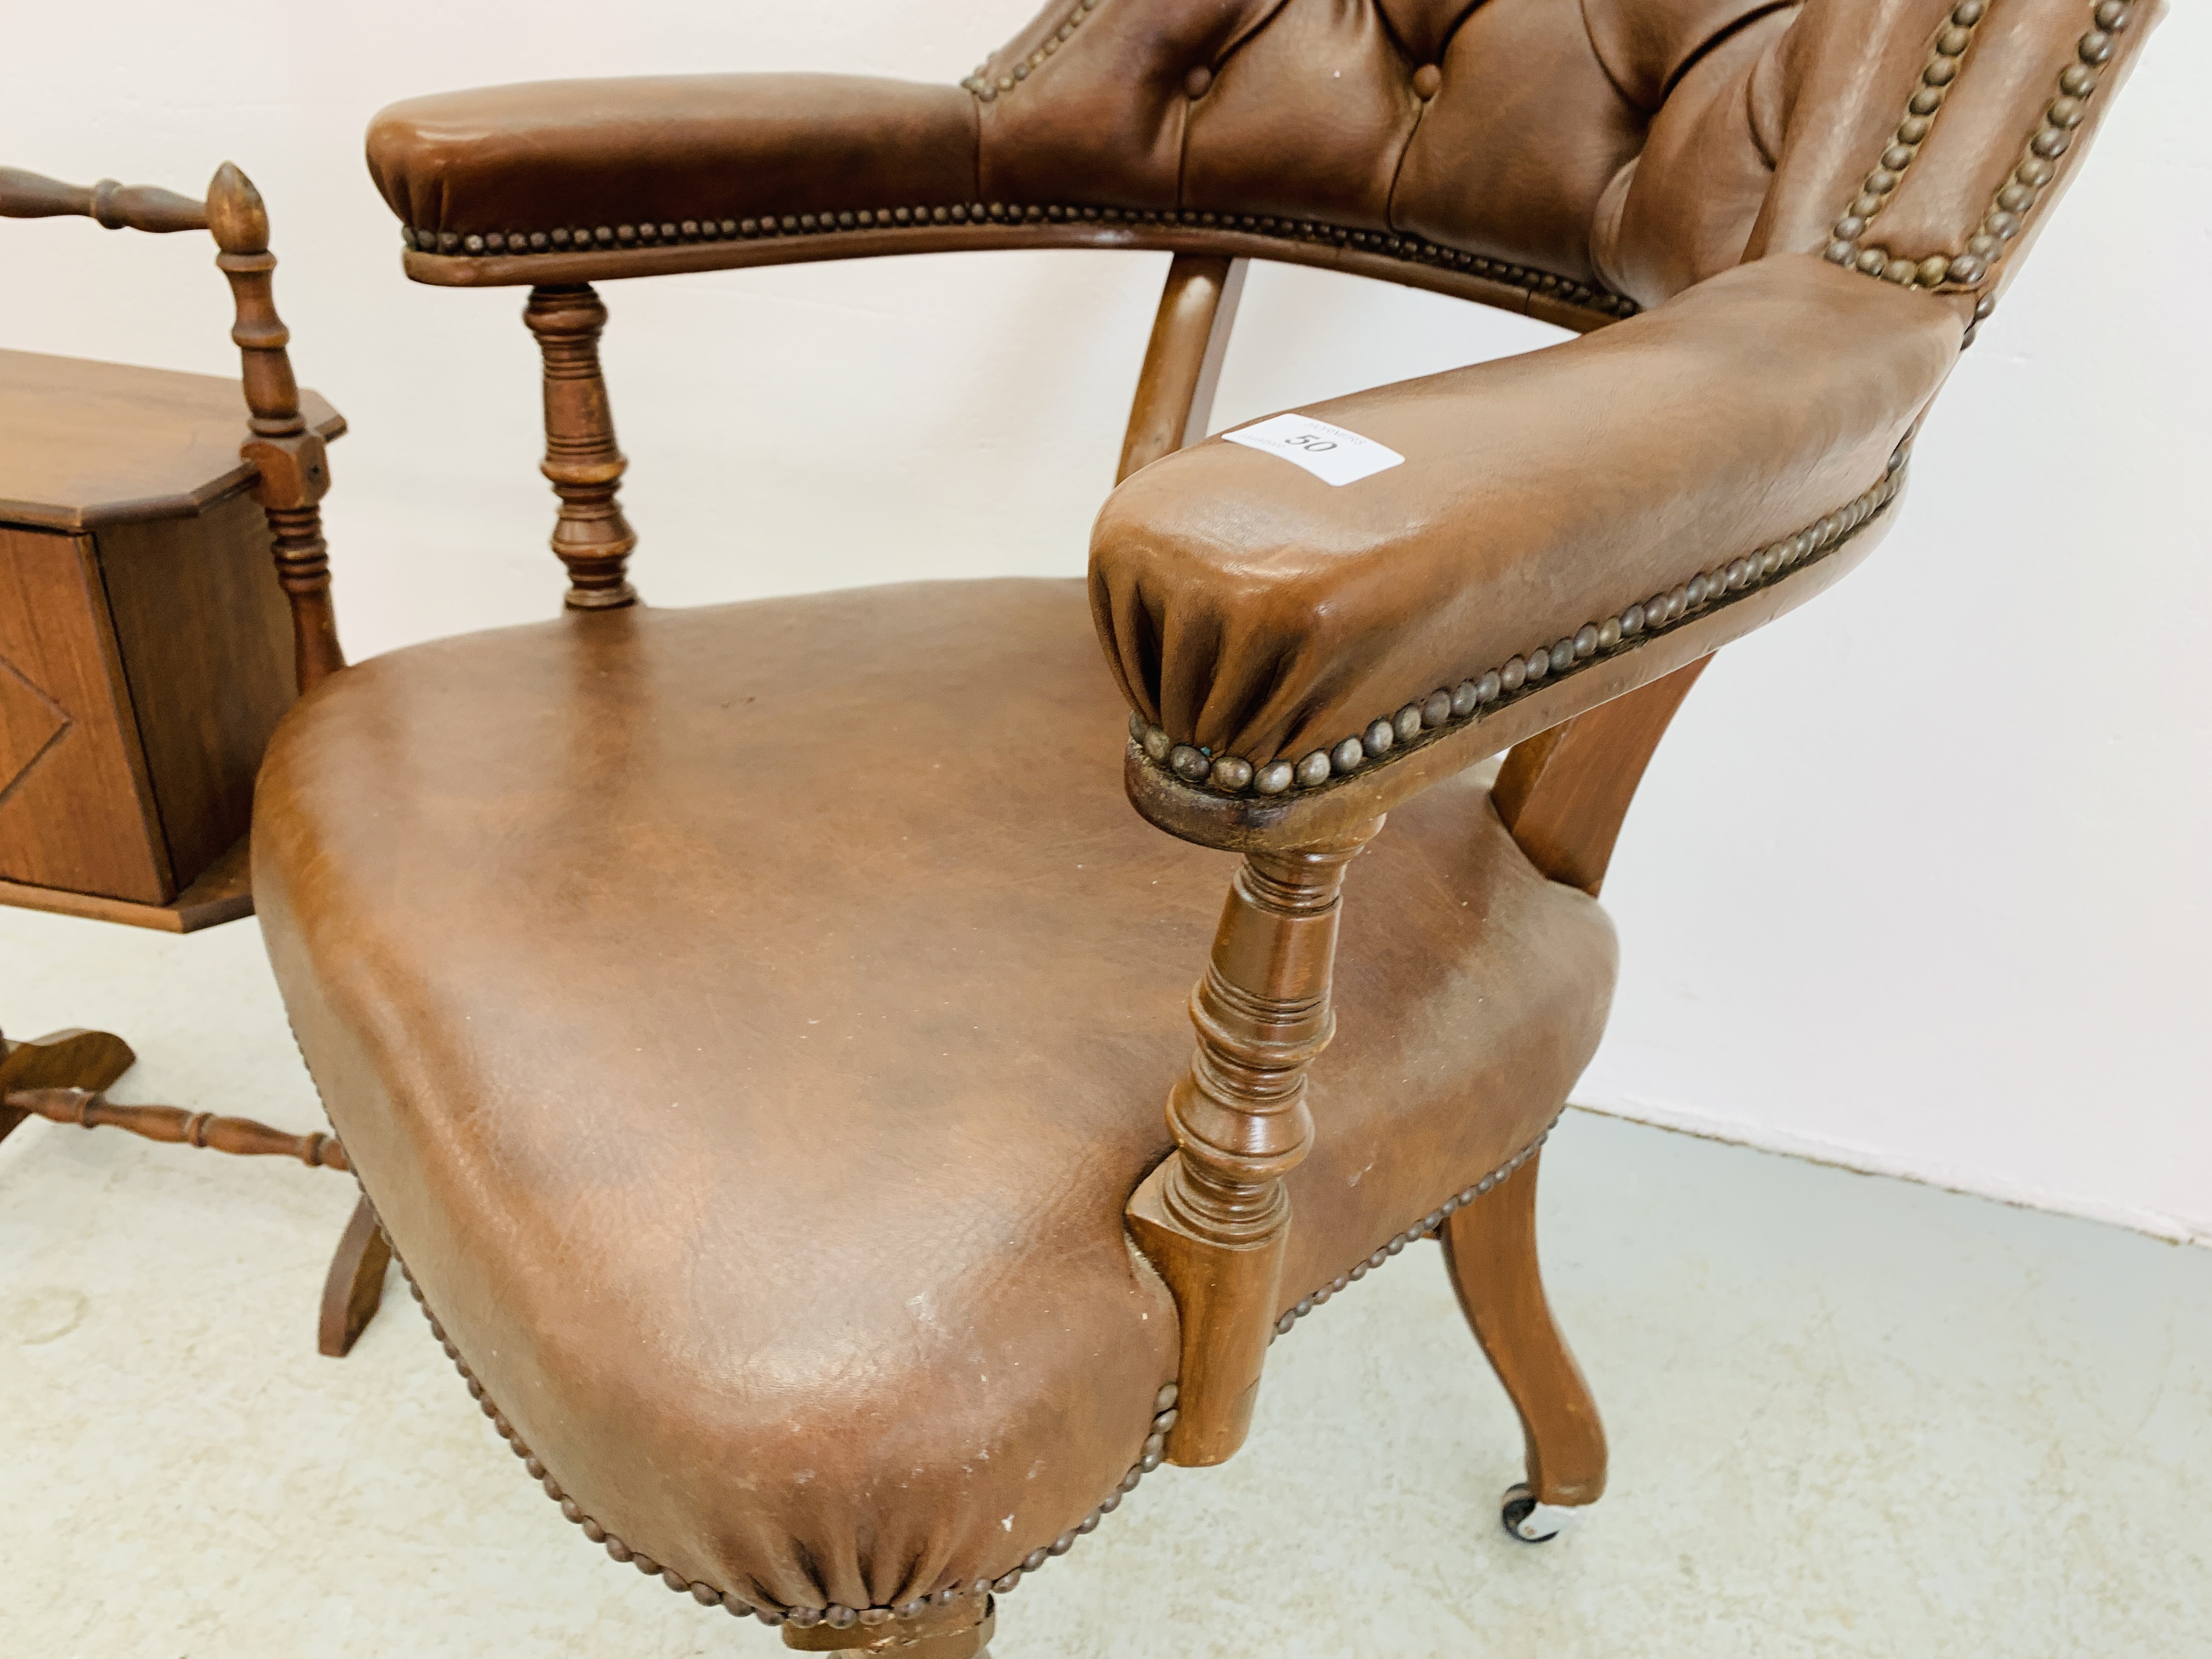 A REPRODUCTION BROWN LEATHER OFFICE CHAIR WITH STUDD DETAIL ALONG WITH A SMALL SINGLE DOOR TURNED - Image 4 of 8